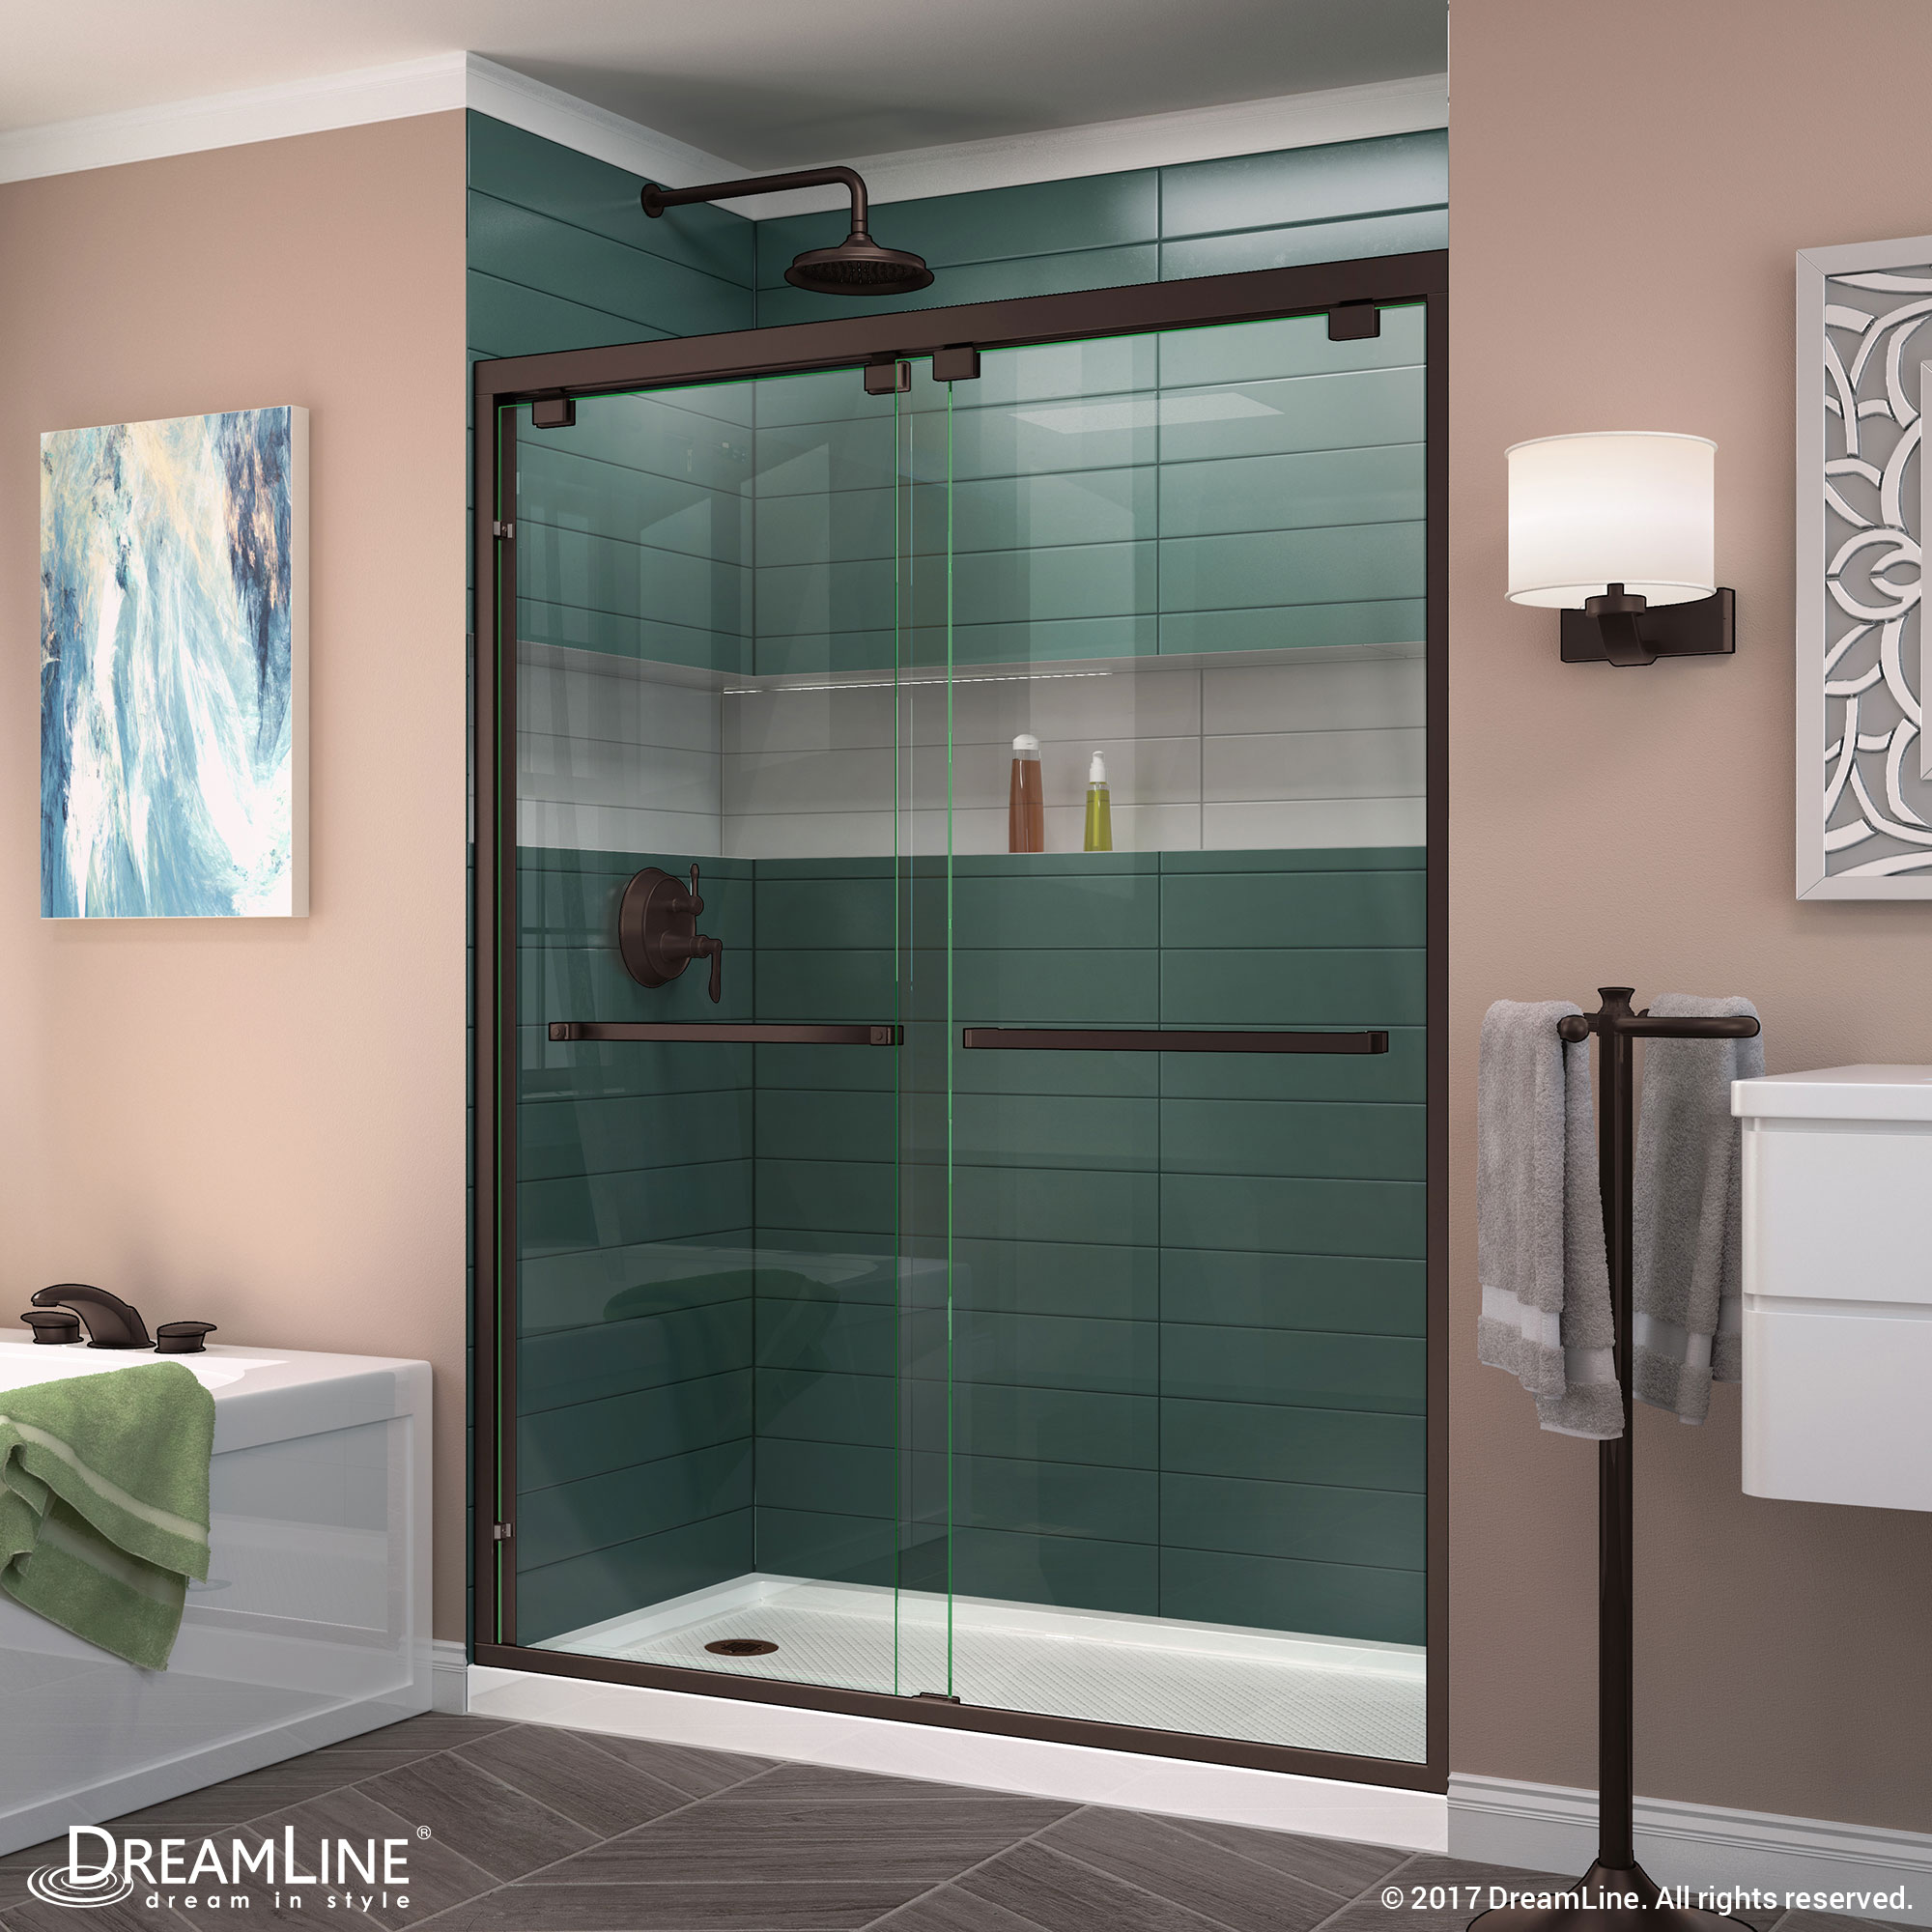 DreamLine Encore 36 in. D x 60 in. W x 78 3/4 in. H Bypass Shower Door in Brushed Nickel and Left Drain White Base Kit